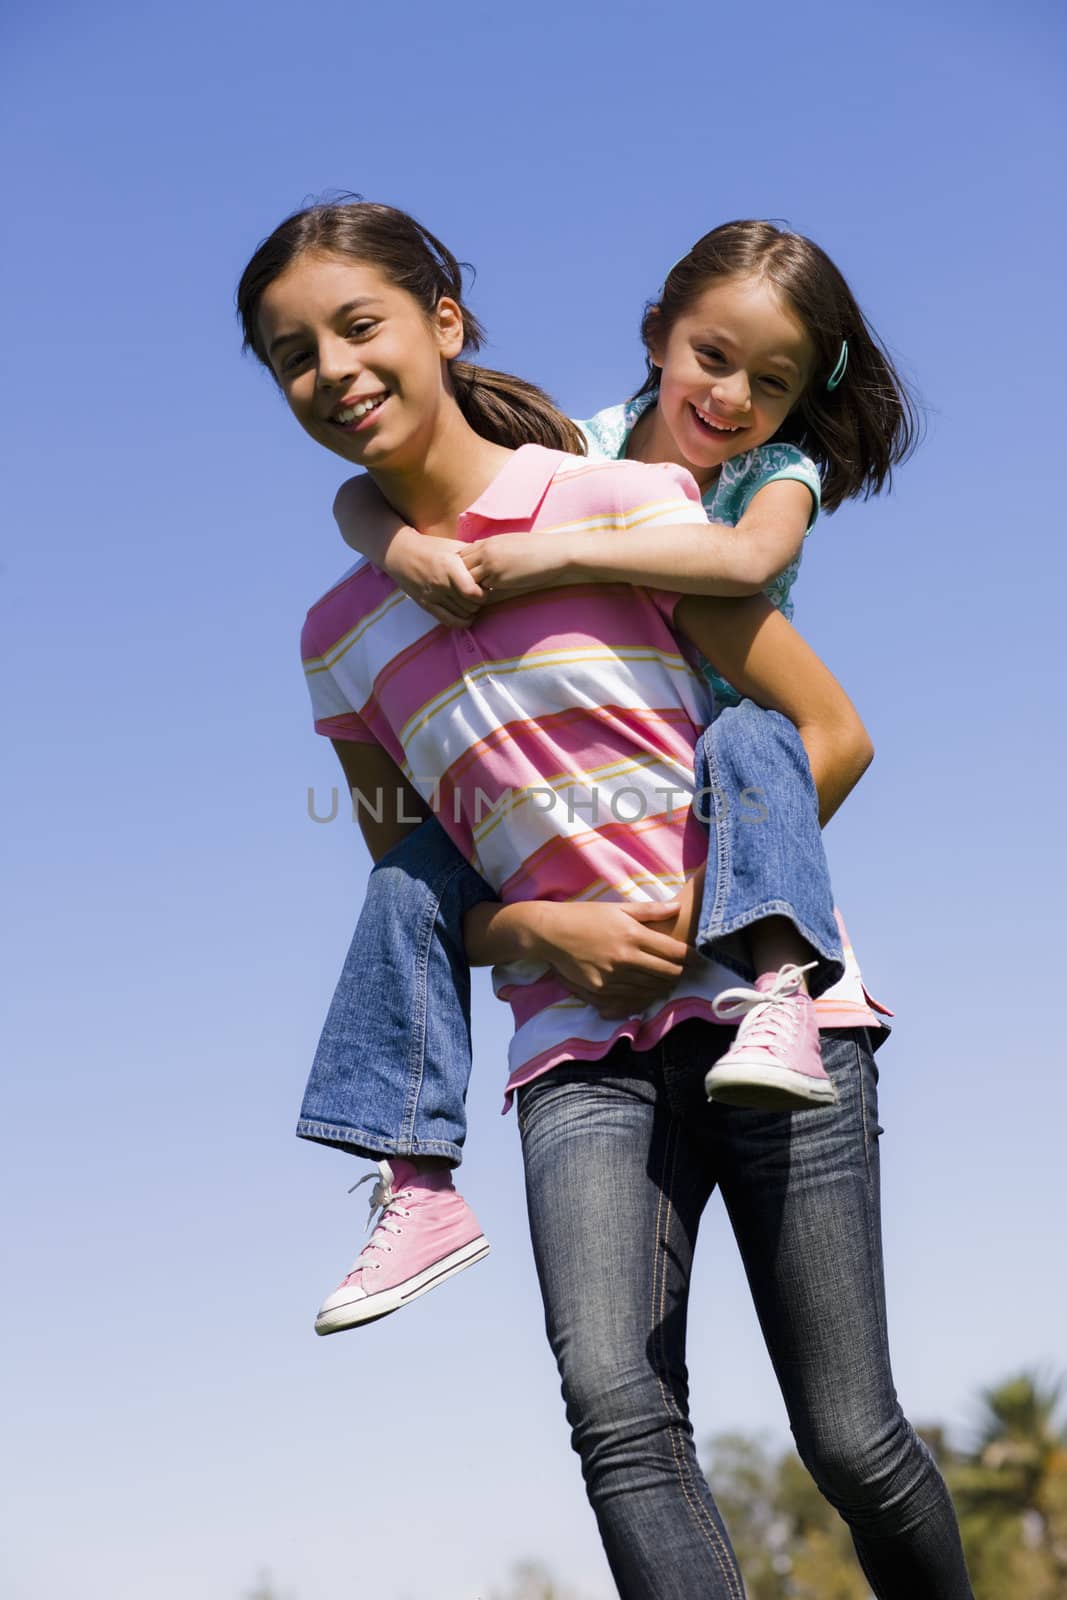 Teenage Girl Giving A Piggyback Ride To Younger Sister